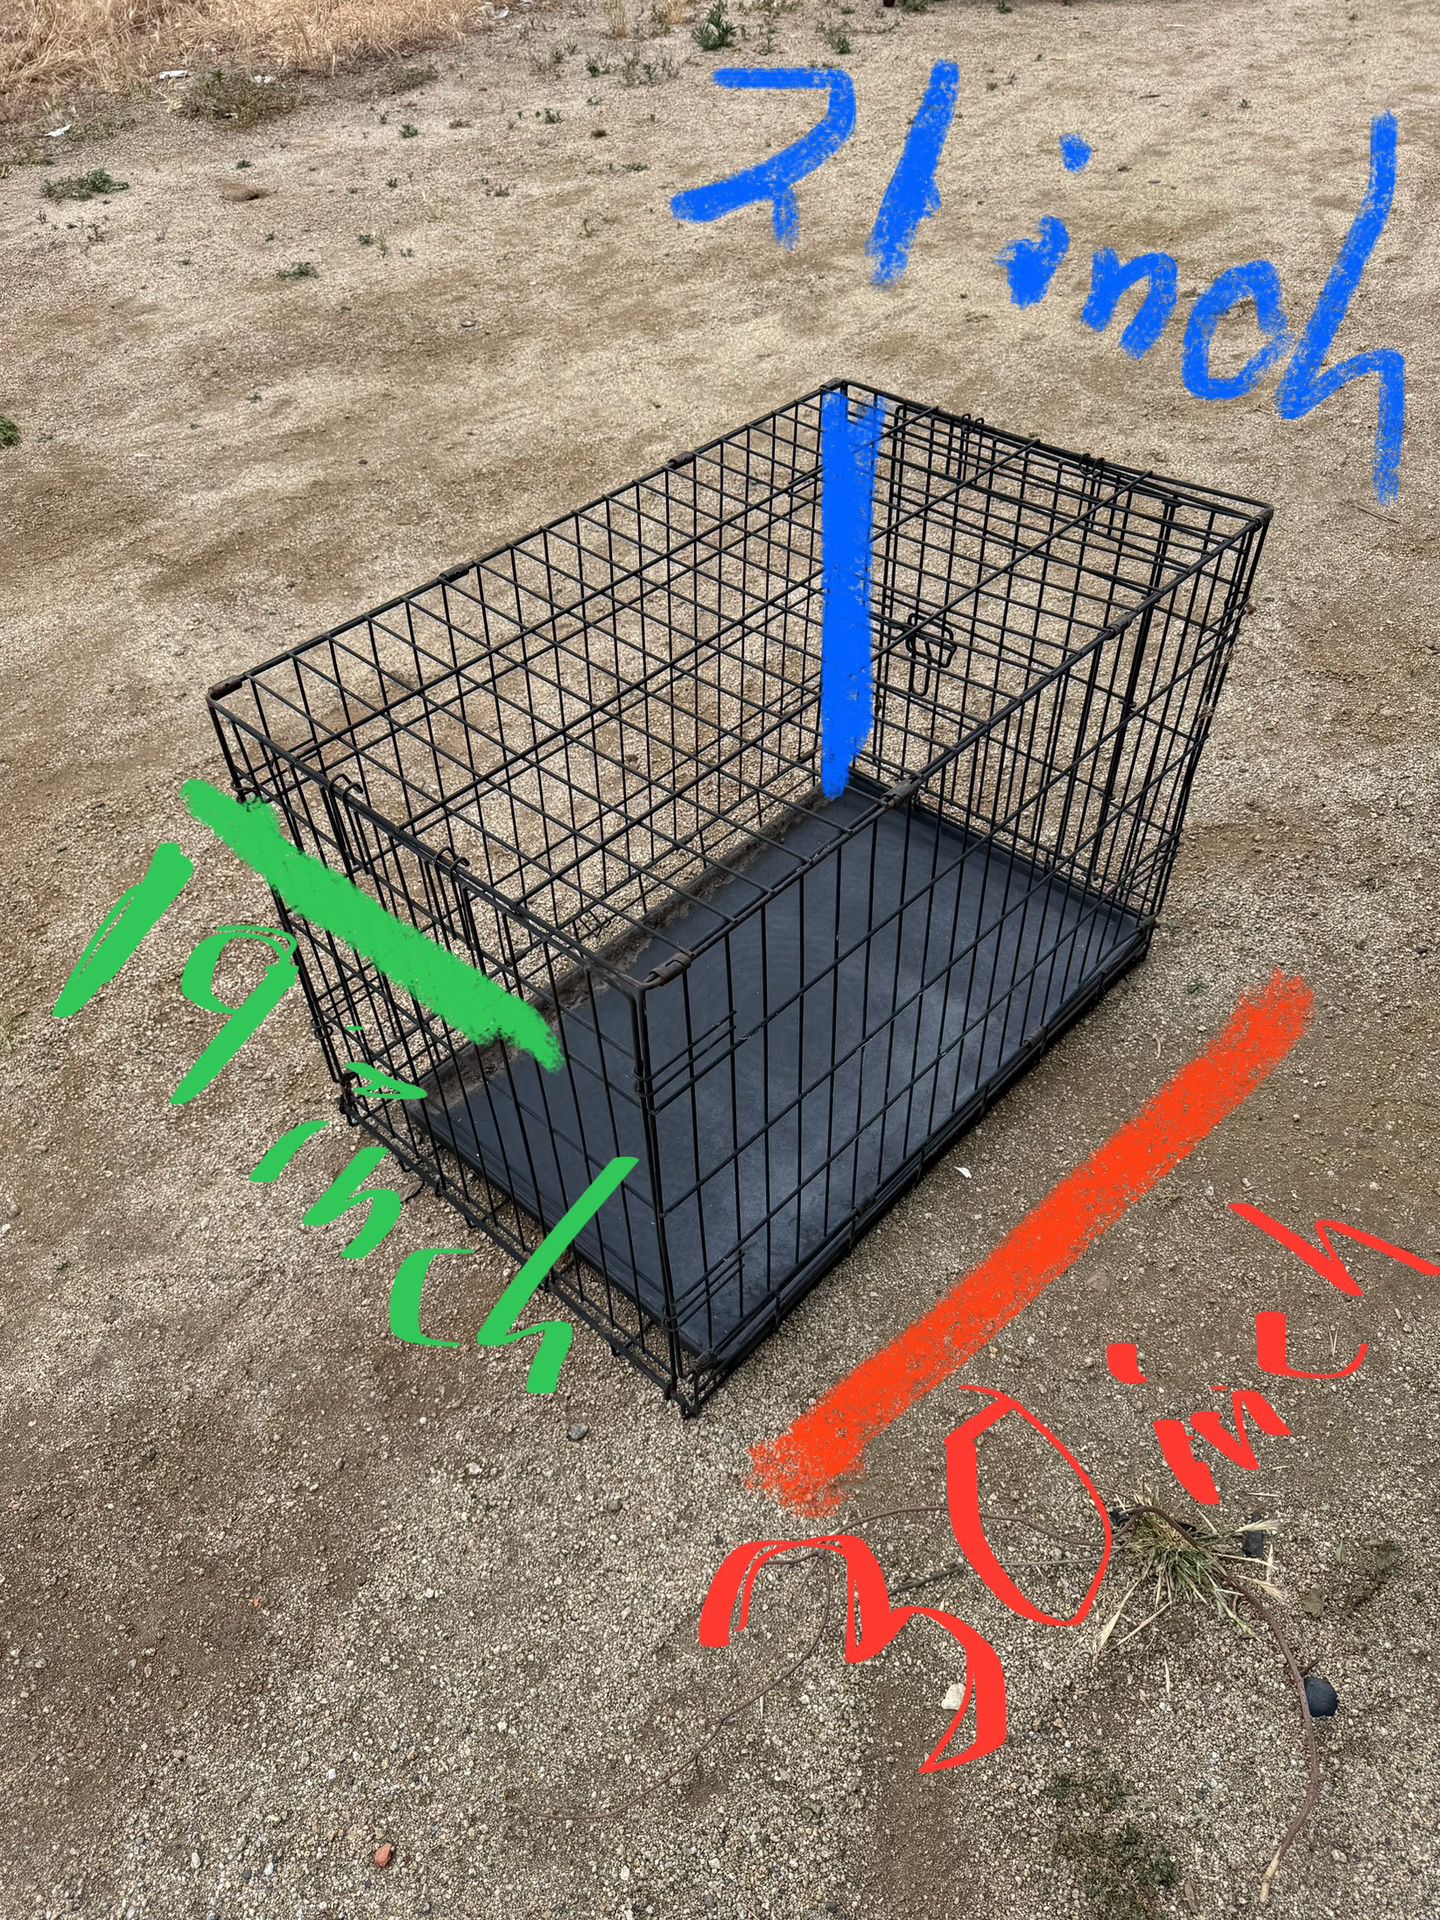 Dog crate / kennel